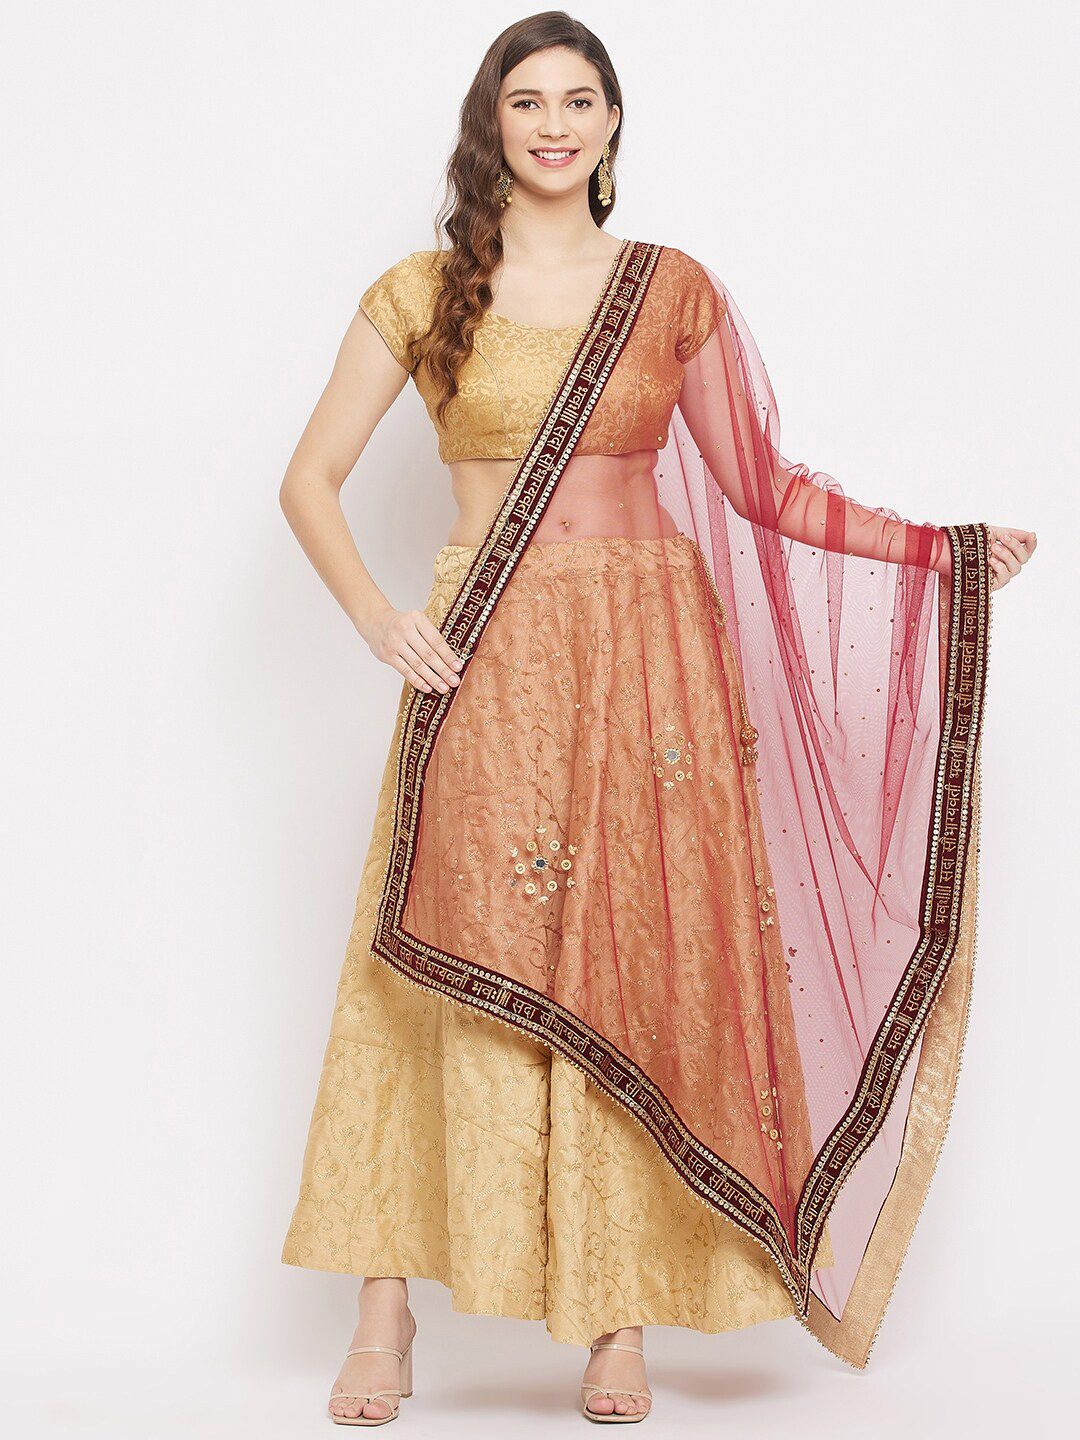 Clora Creation Maroon & Gold-Coloured Ethnic Embroidered Dupatta with Beads and Stones Price in India